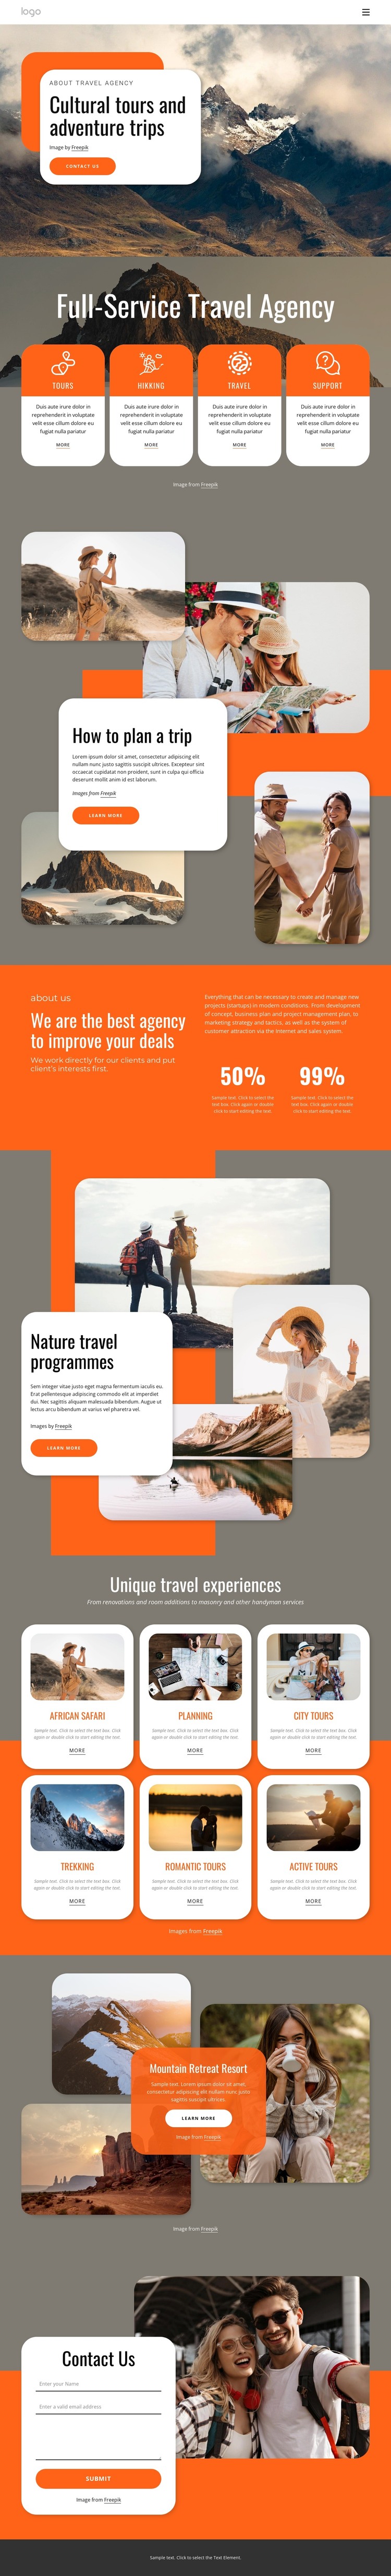 Group travel for all ages Web Design